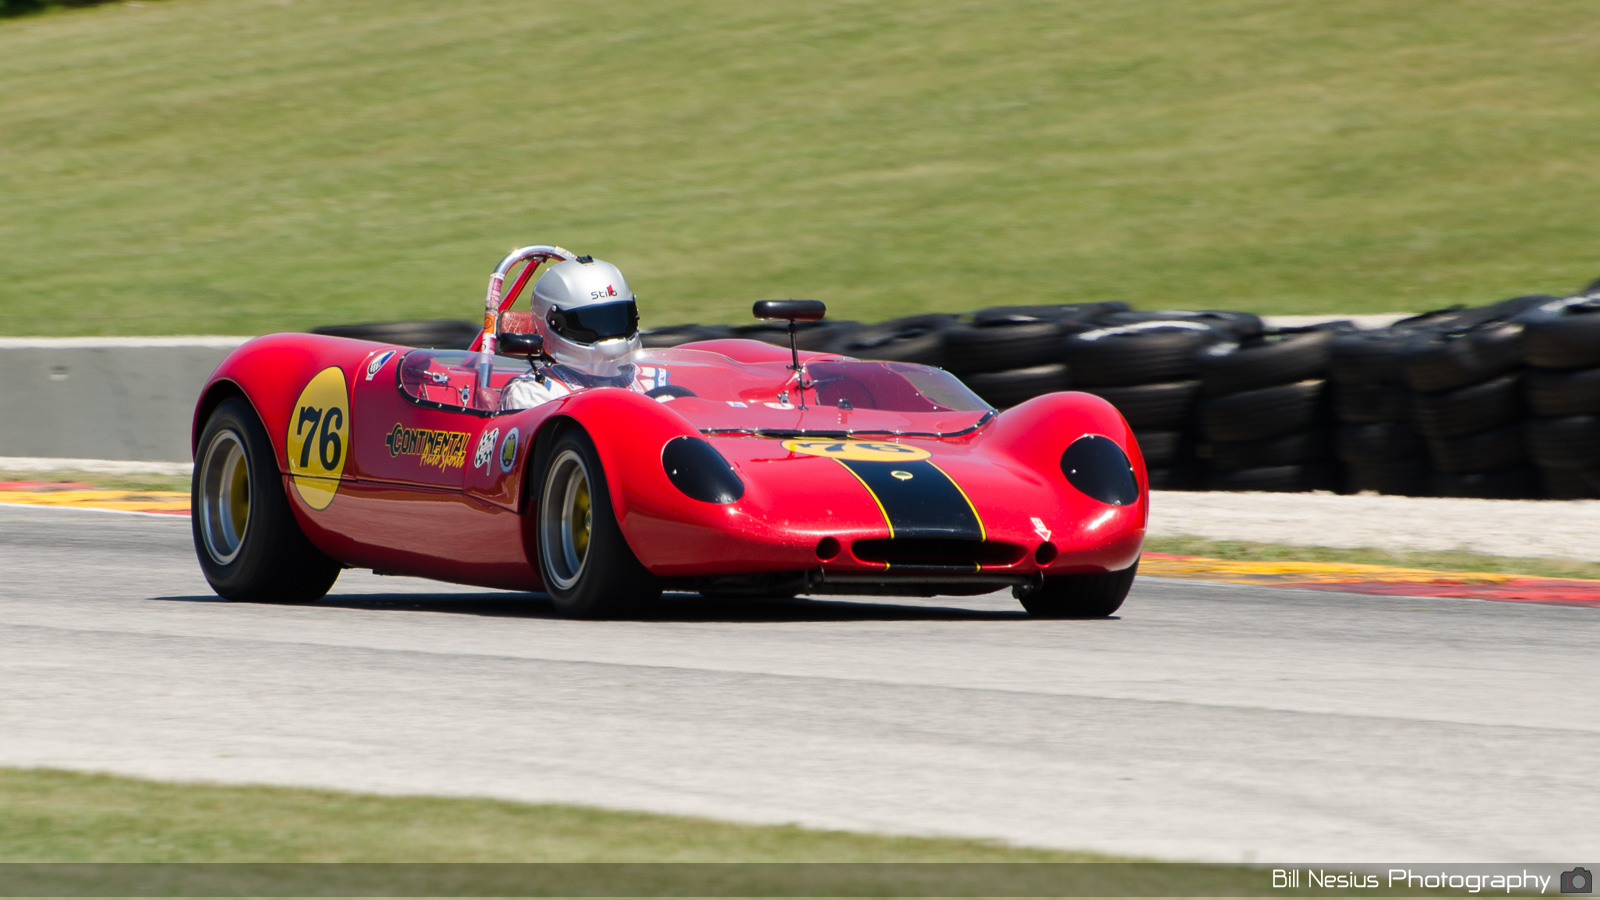 1965 Lotus 23 No.76 drinen by Joel Weinberger  at Road America T7 / DSC_6932 / 3